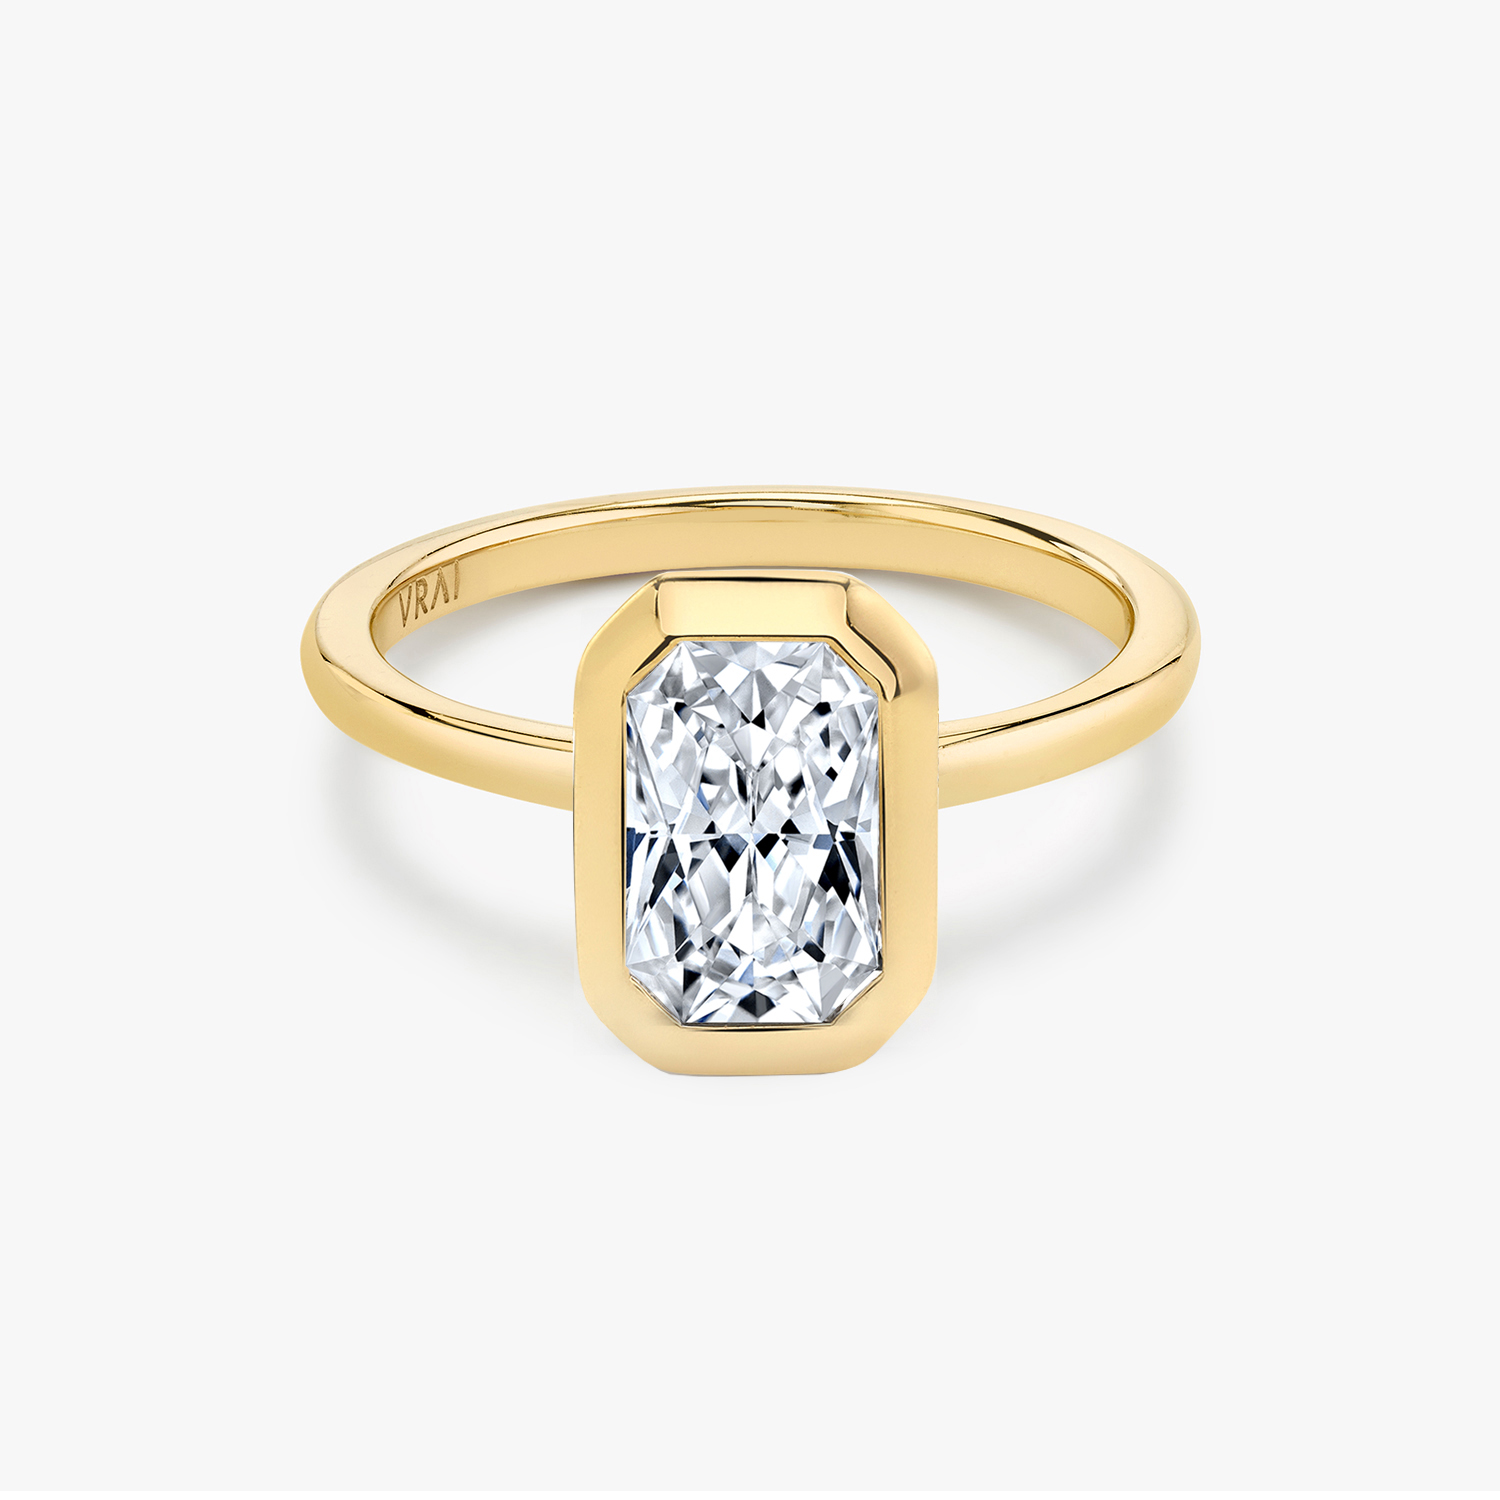 VRAI The Knife-Edge Wedding Bands | 18K Yellow Gold